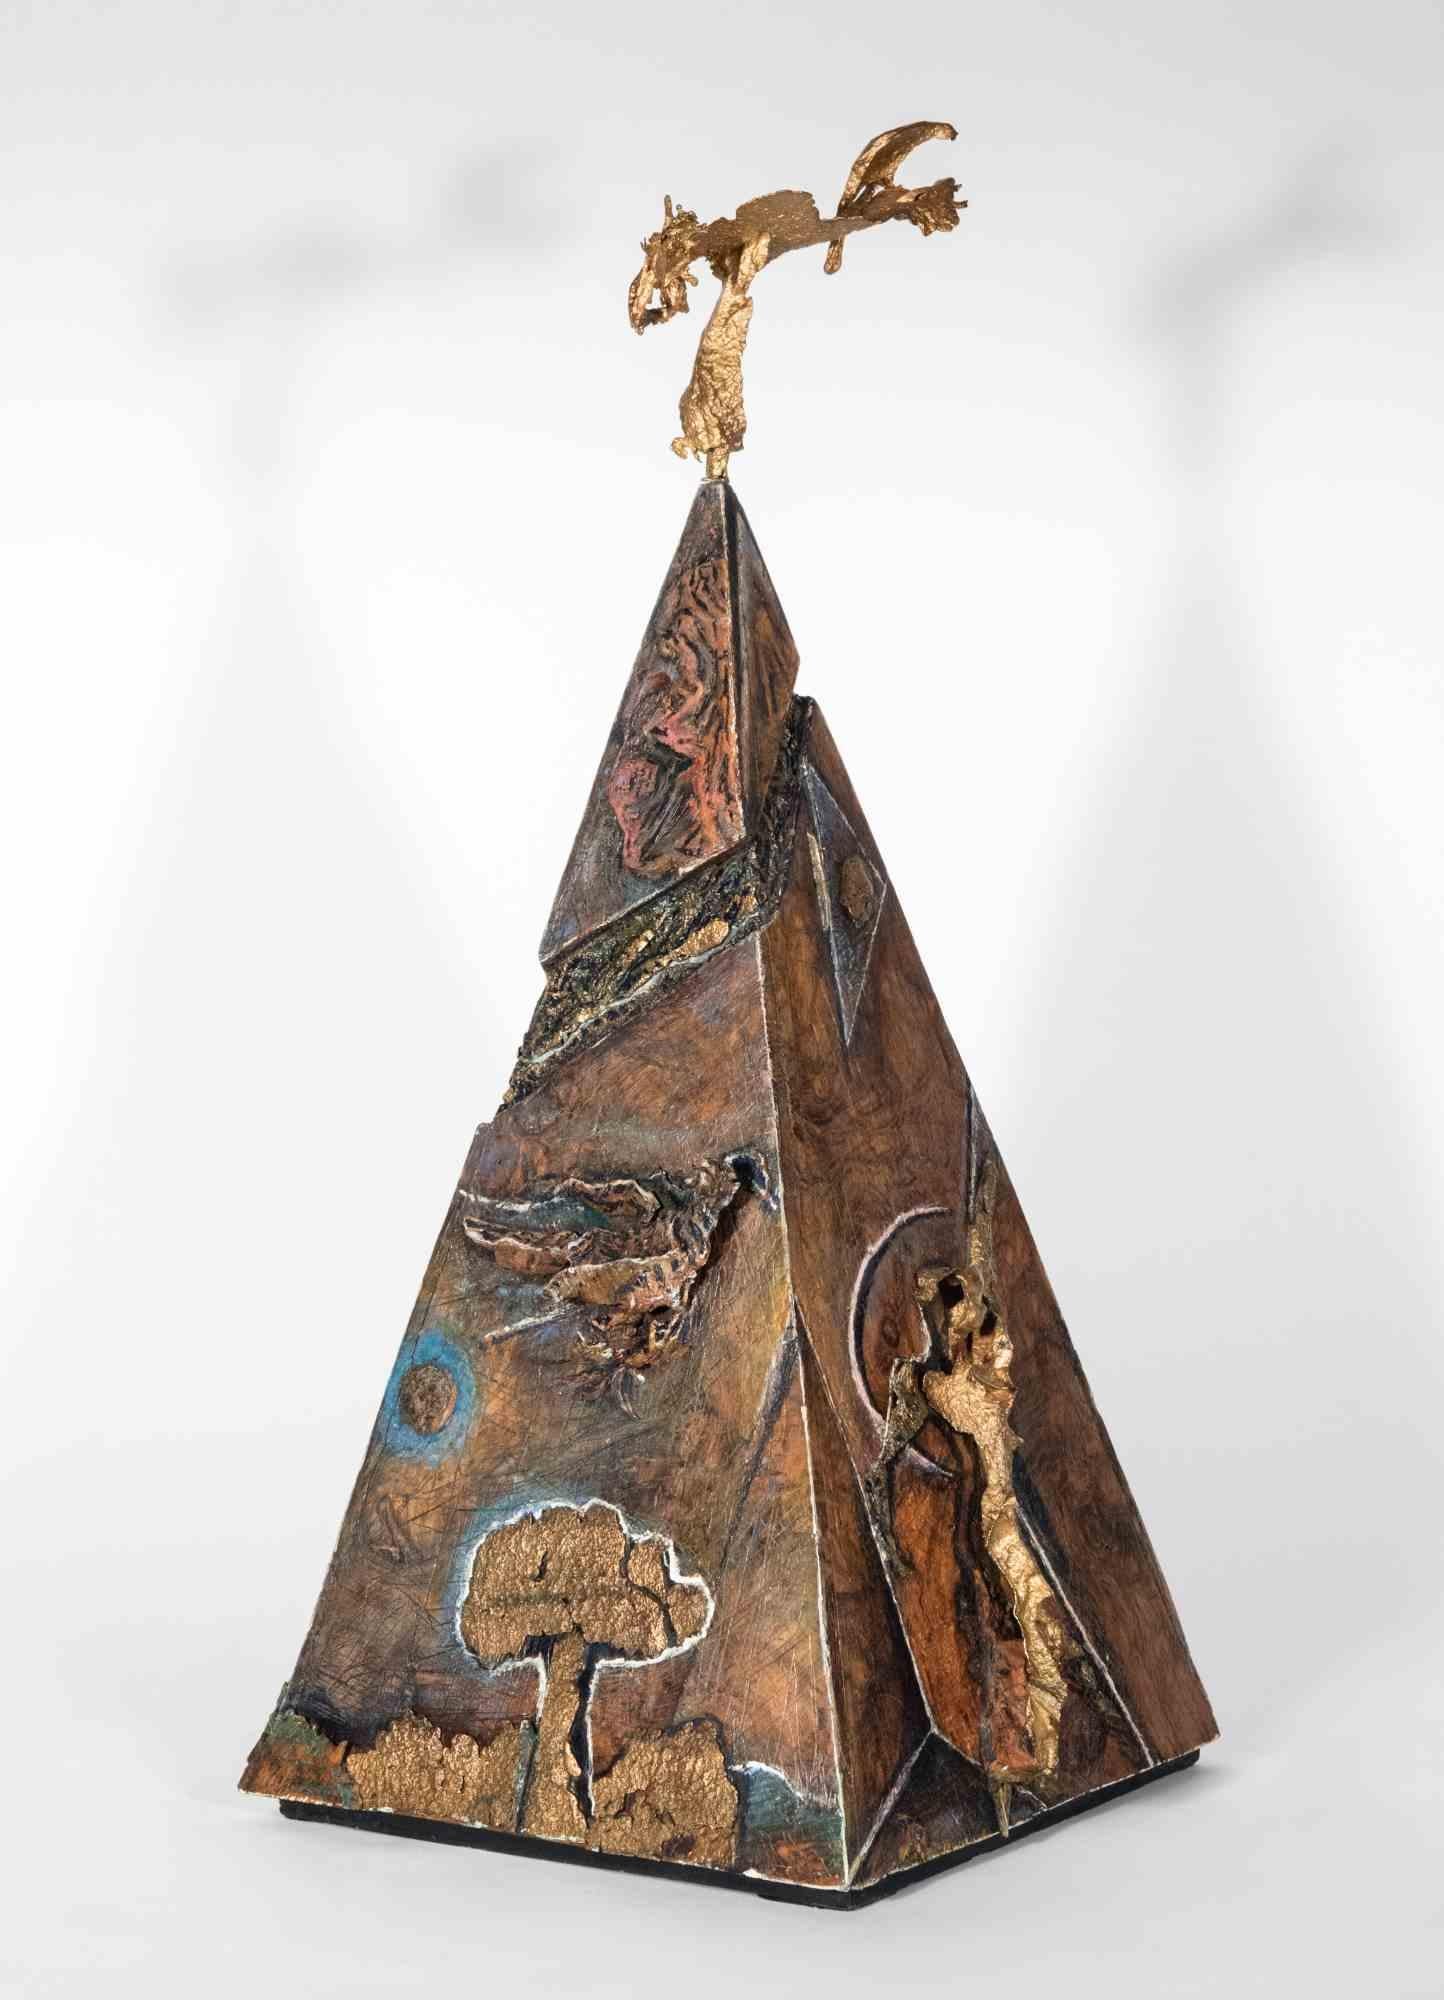 Reflective Sculpture, in Excellent Condition, Authentic 2001 Creation in Gold Leaf and Hand Painted Wood, proposed by Sculptor Lorenzo Servalli, with which the Artist questions the Fast Track that, at times, Life can offer, symbolised by privileges